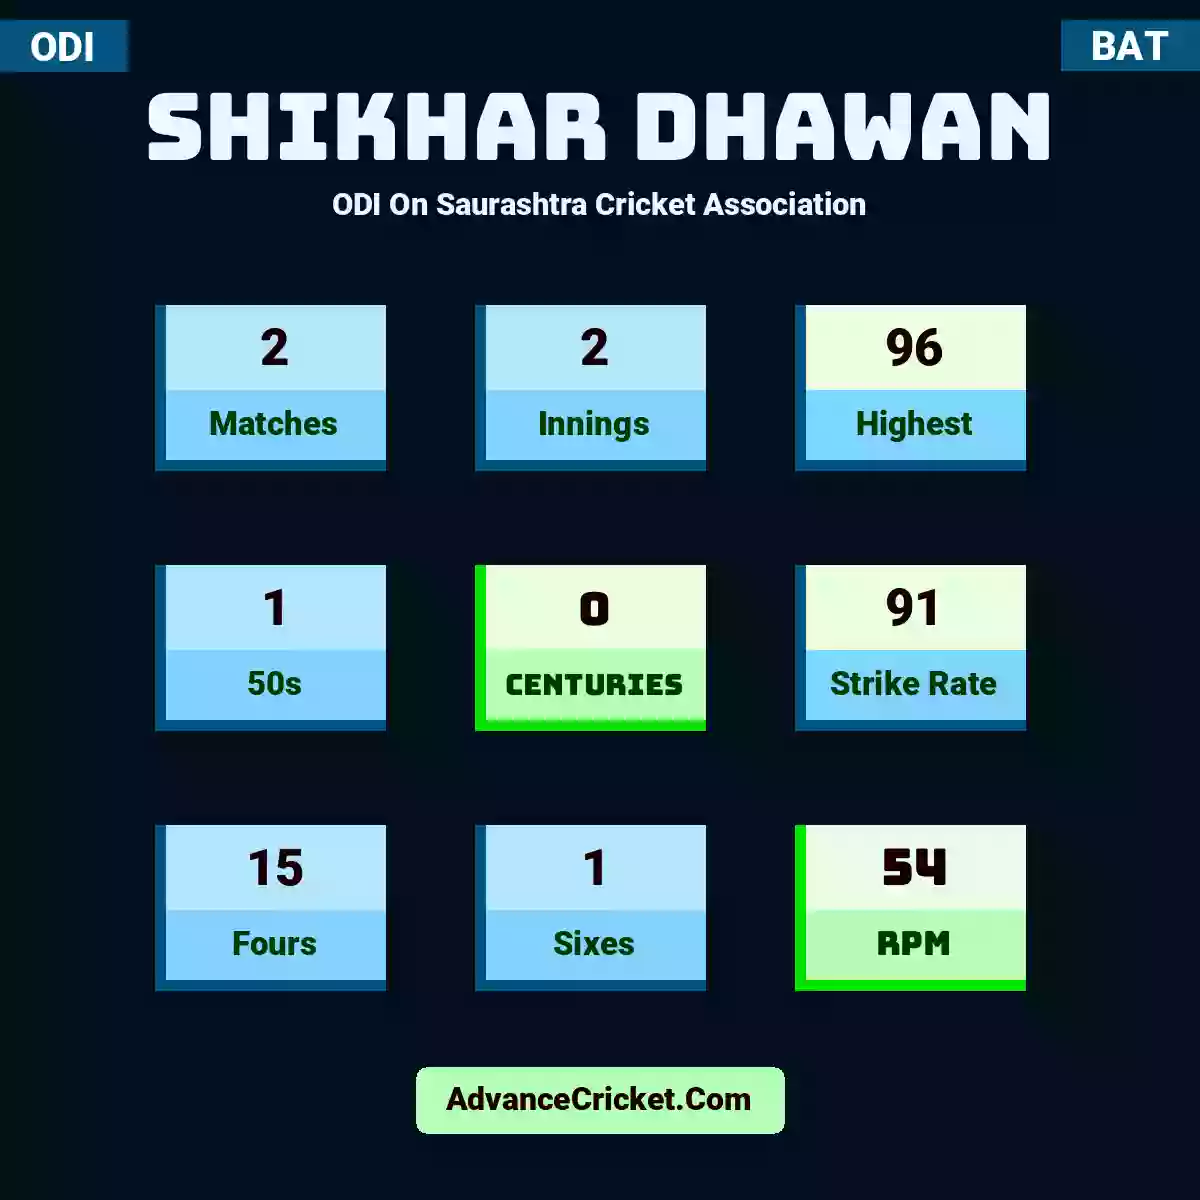 Shikhar Dhawan ODI  On Saurashtra Cricket Association, Shikhar Dhawan played 2 matches, scored 96 runs as highest, 1 half-centuries, and 0 centuries, with a strike rate of 91. S.Dhawan hit 15 fours and 1 sixes, with an RPM of 54.